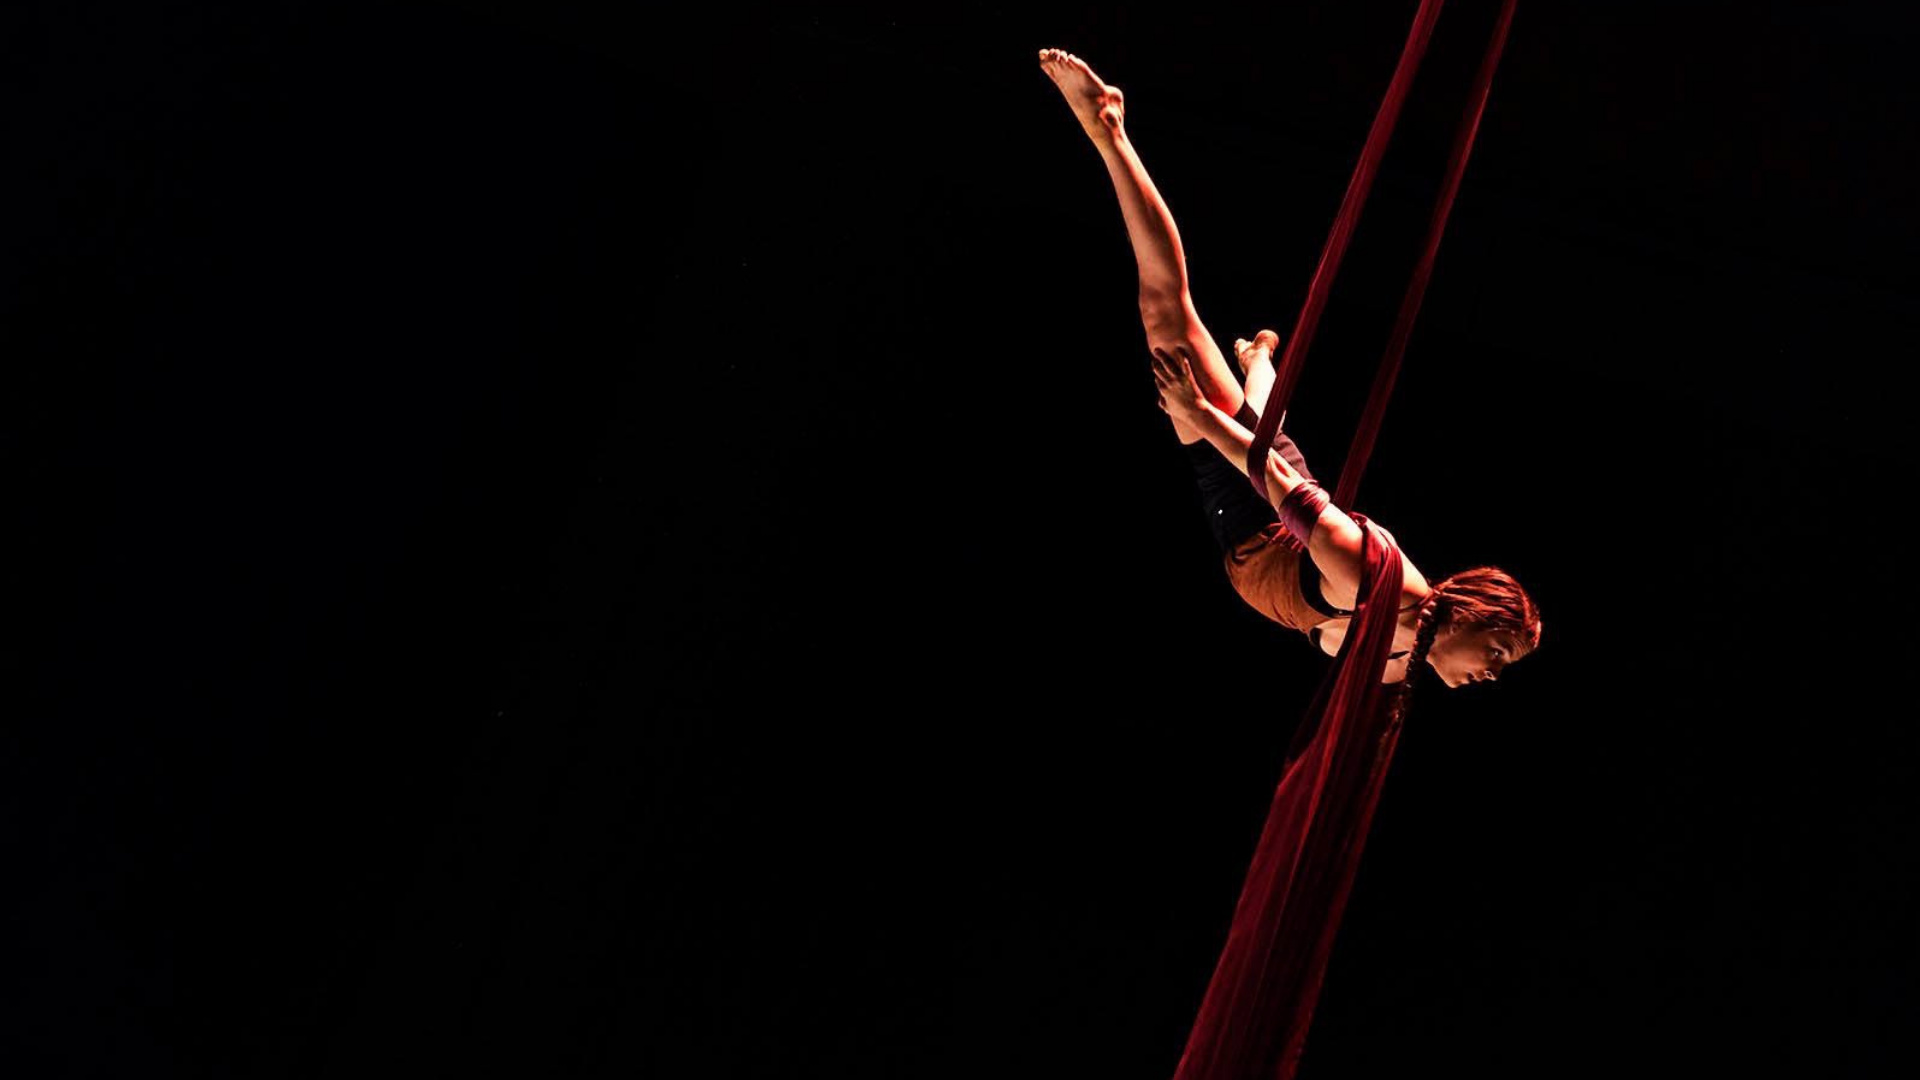 Aerial Silks: An amazing circus performance by a professional gymnast flying in the air. 1920x1080 Full HD Wallpaper.